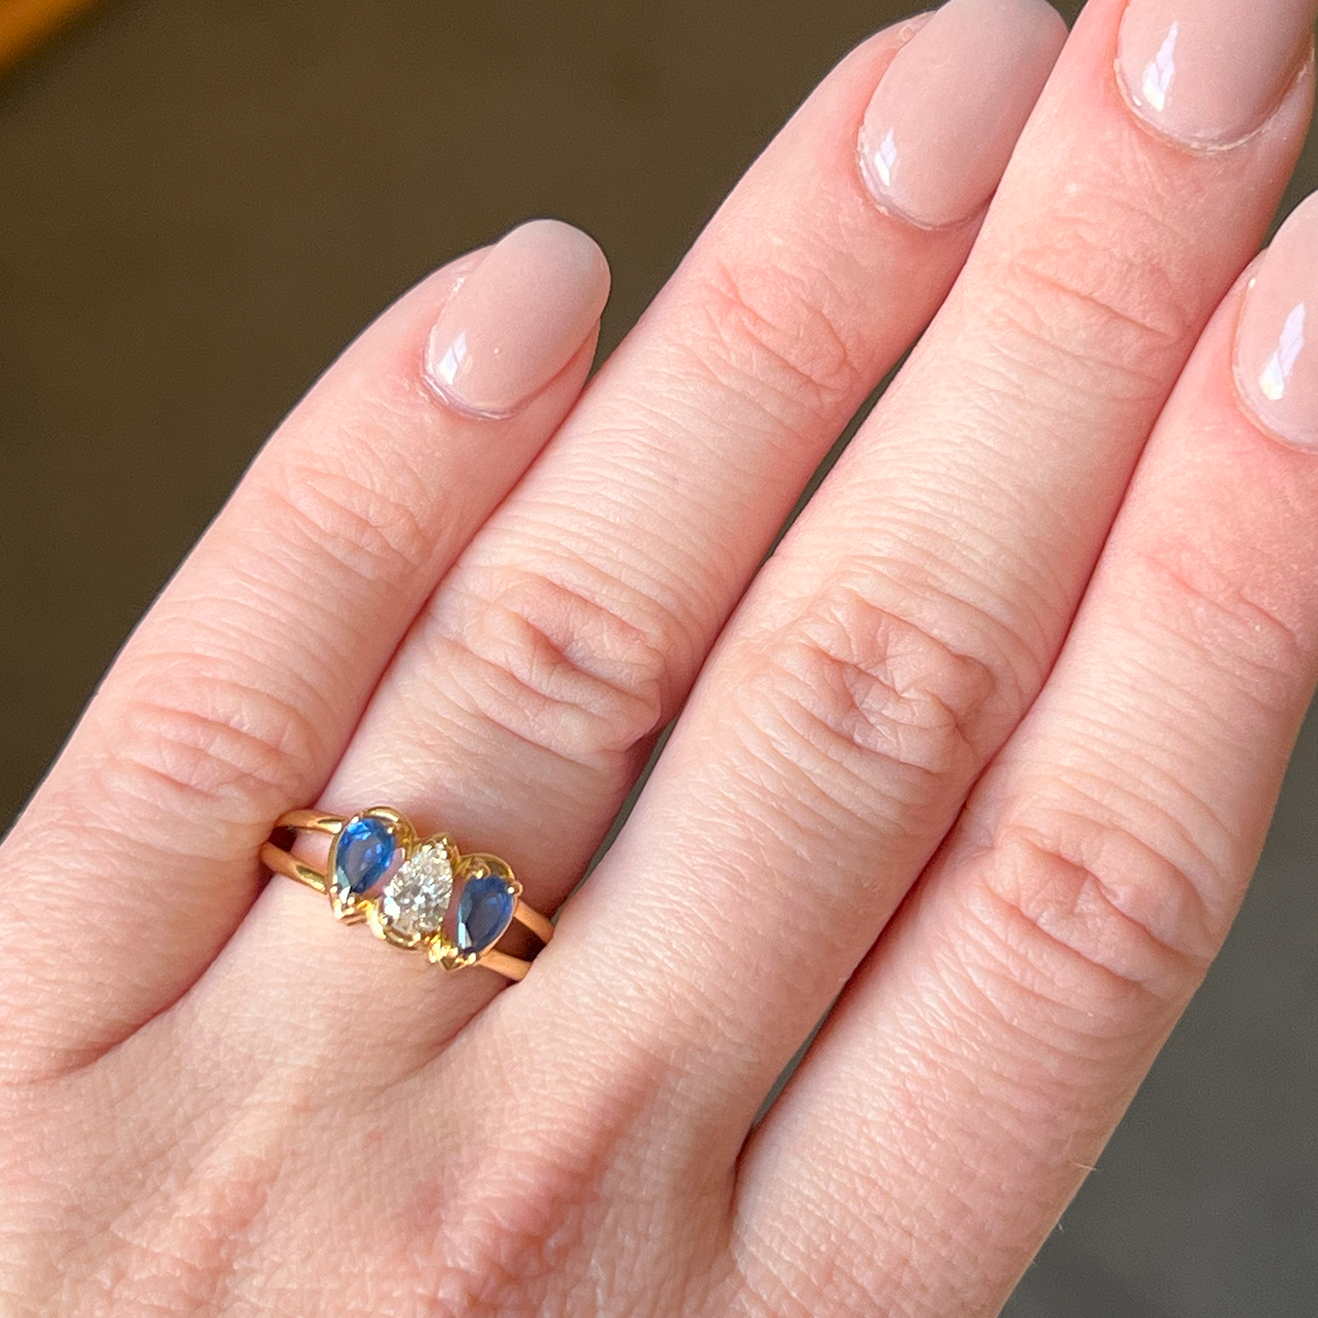 Chaumet 1950s 18kt Yellow Gold Sapphire Ring